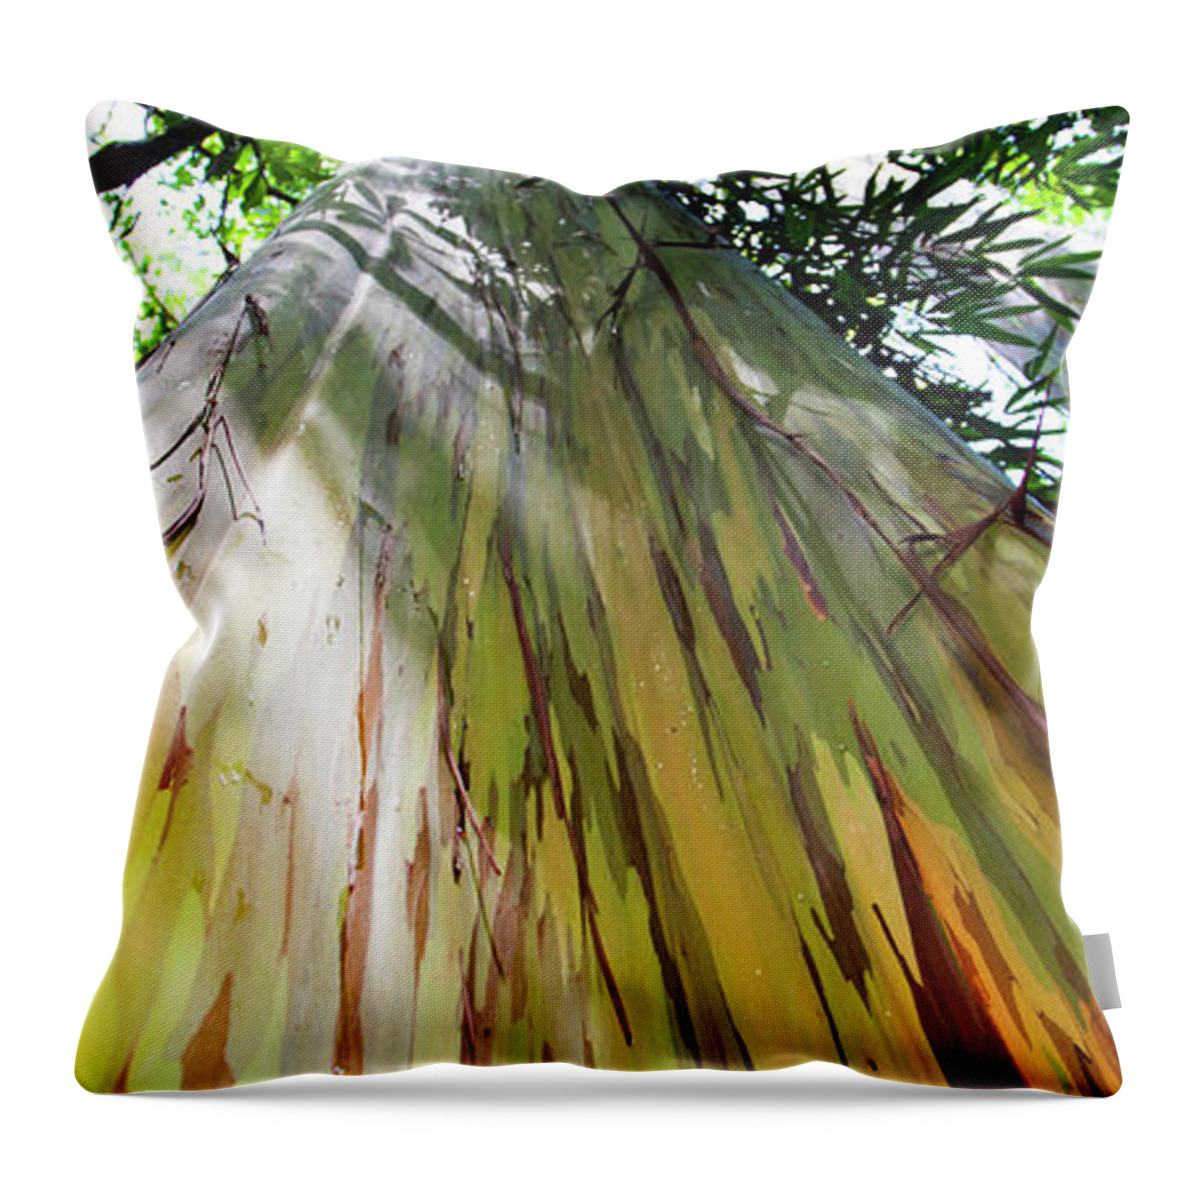 Painted Eucalyptus Tree Throw Pillow featuring the photograph Painted Tree by Anthony Jones